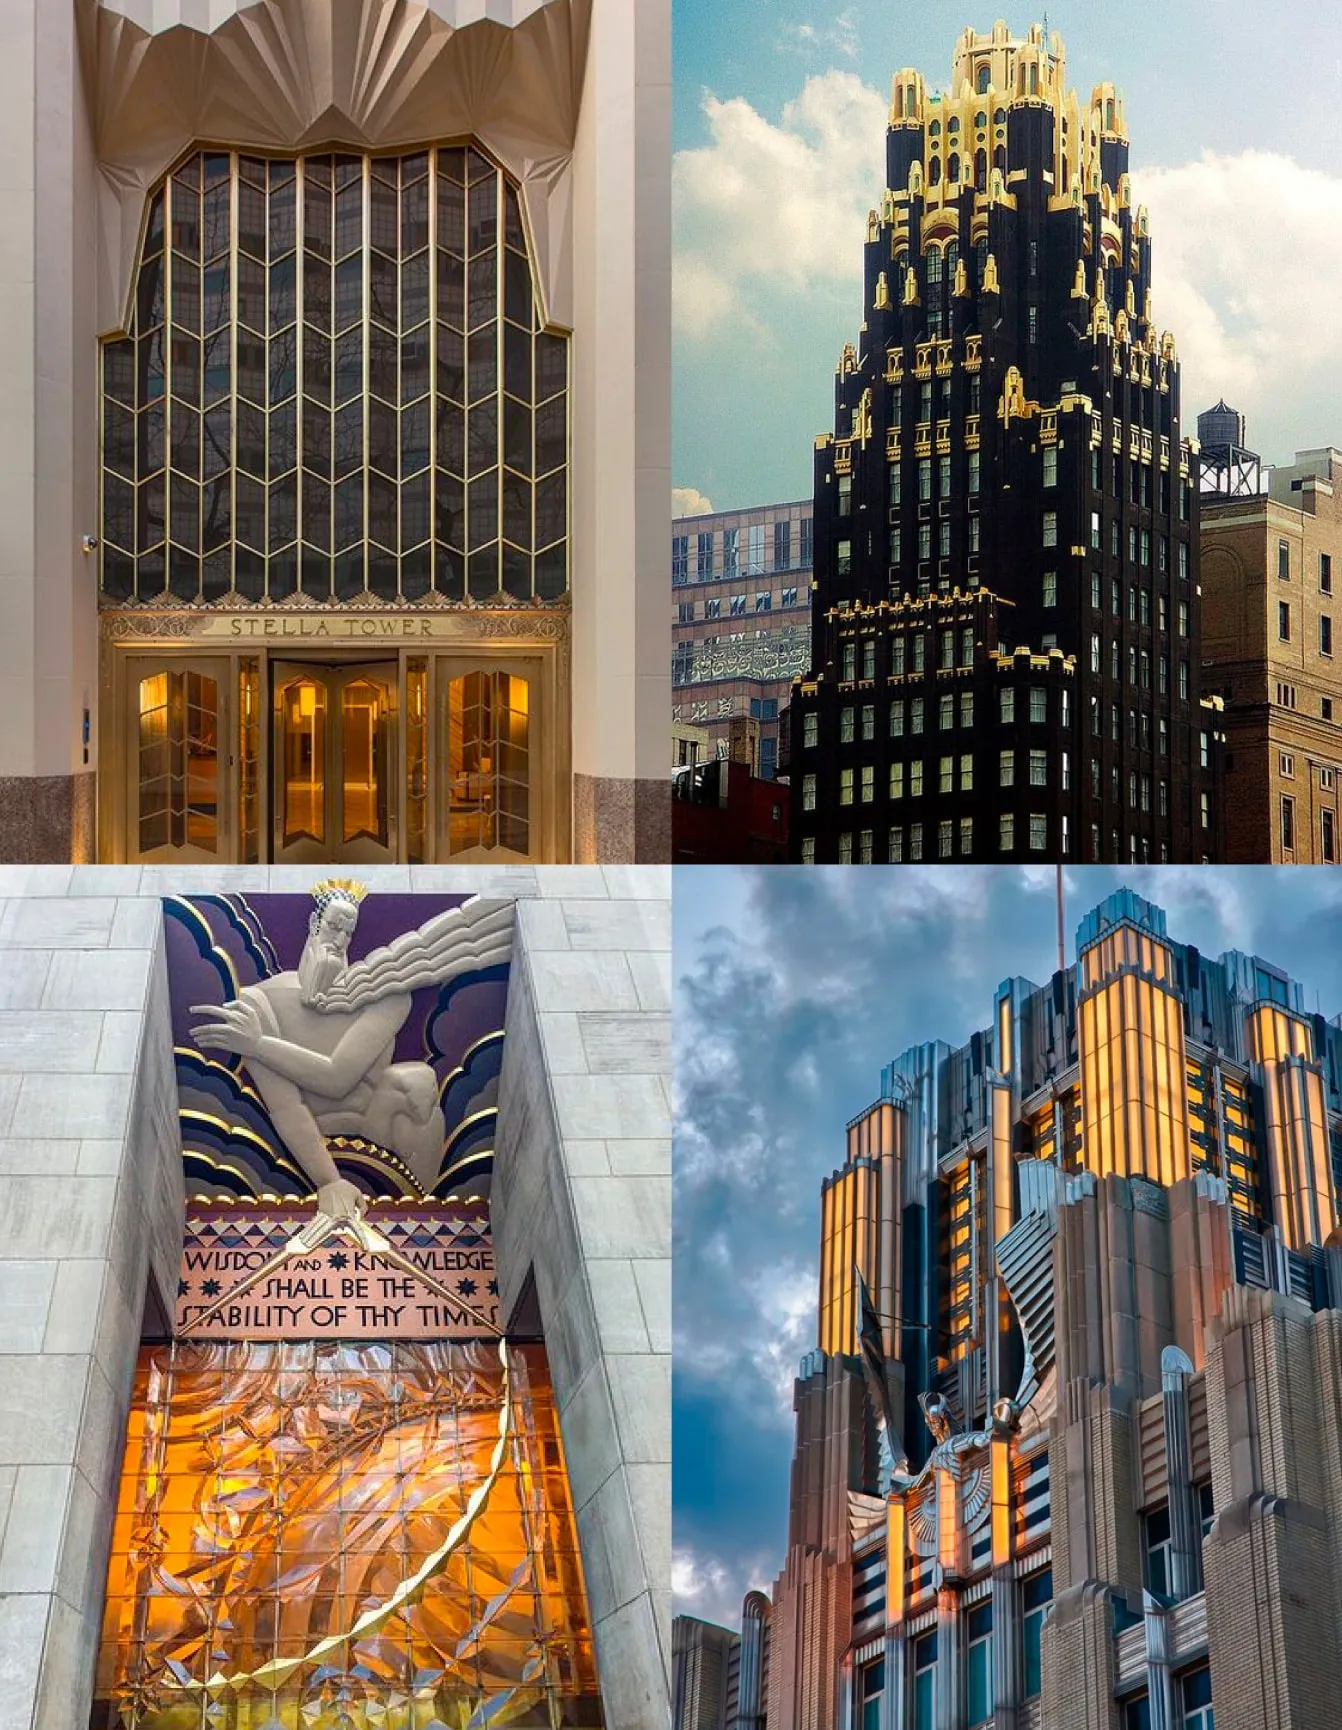 Art Deco Architecture: What Is It and Where to See It